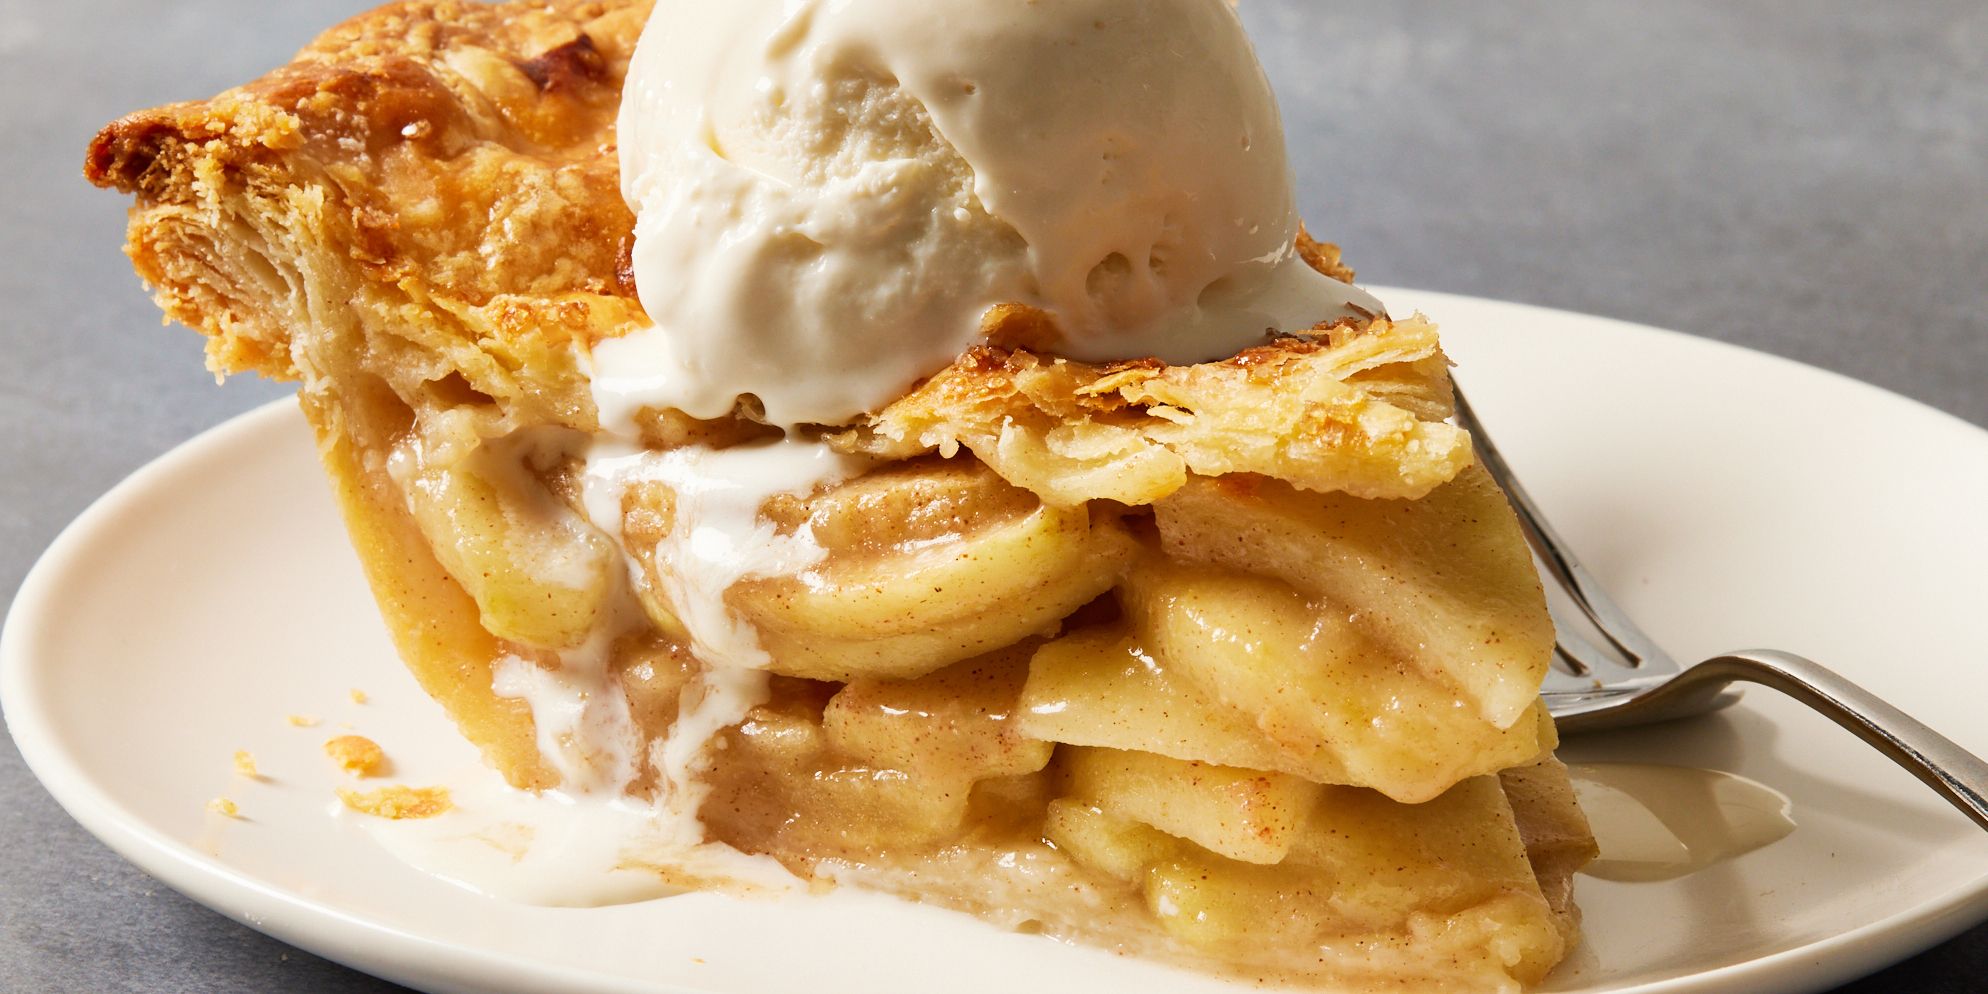 Apple Pie Layer Cake Recipe American Food And Drink The, 59% OFF